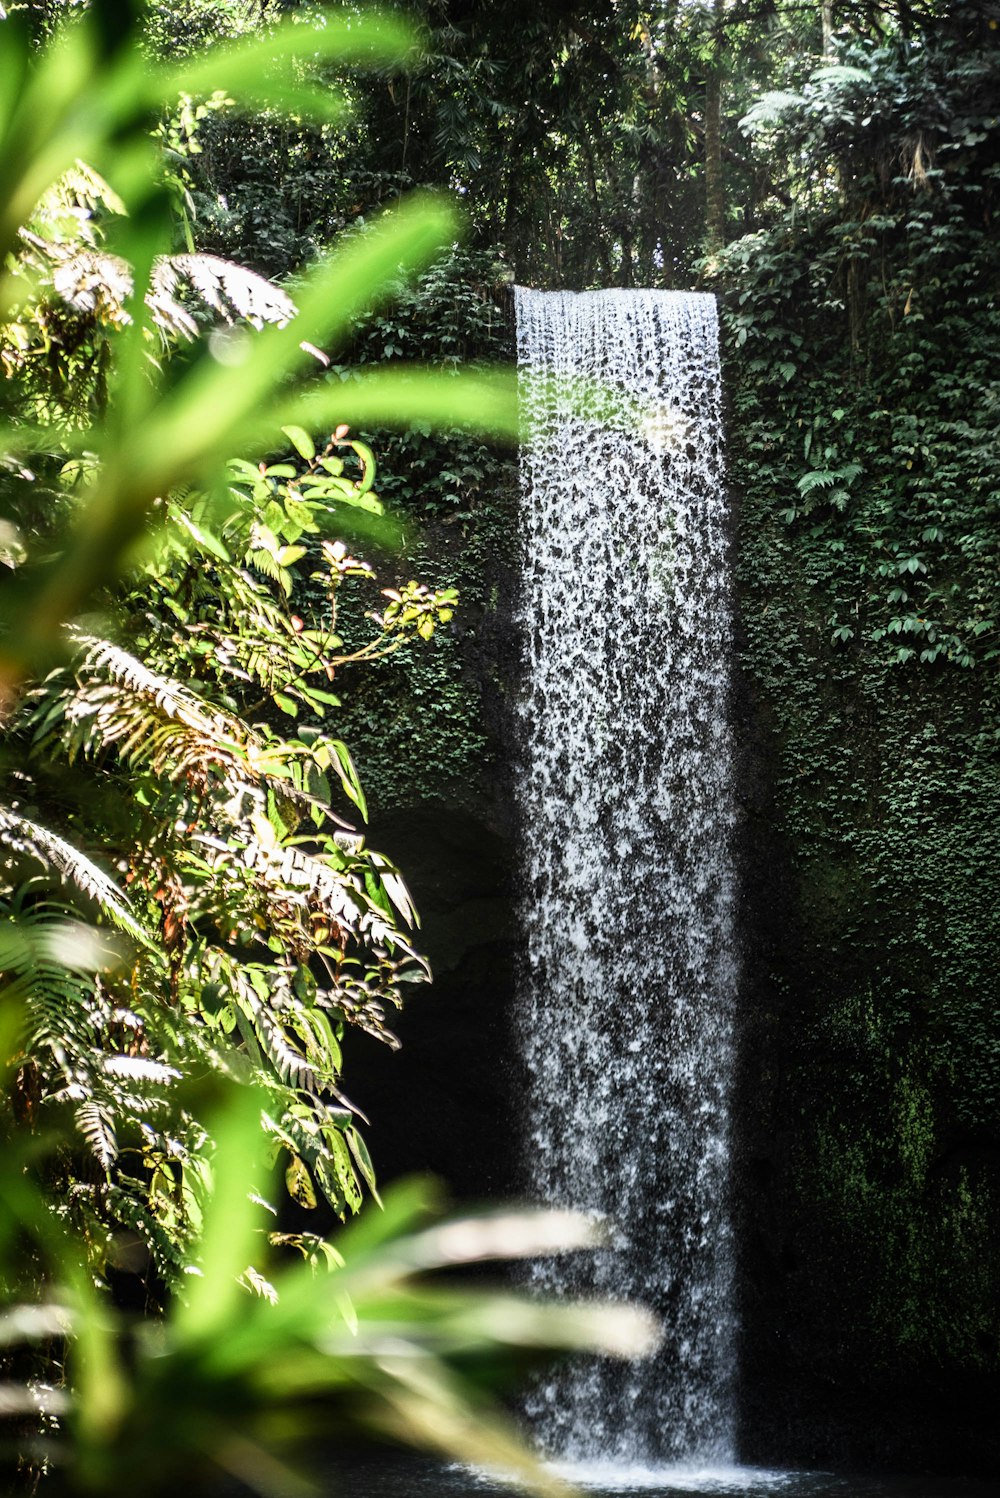 water falls in the middle of green plants